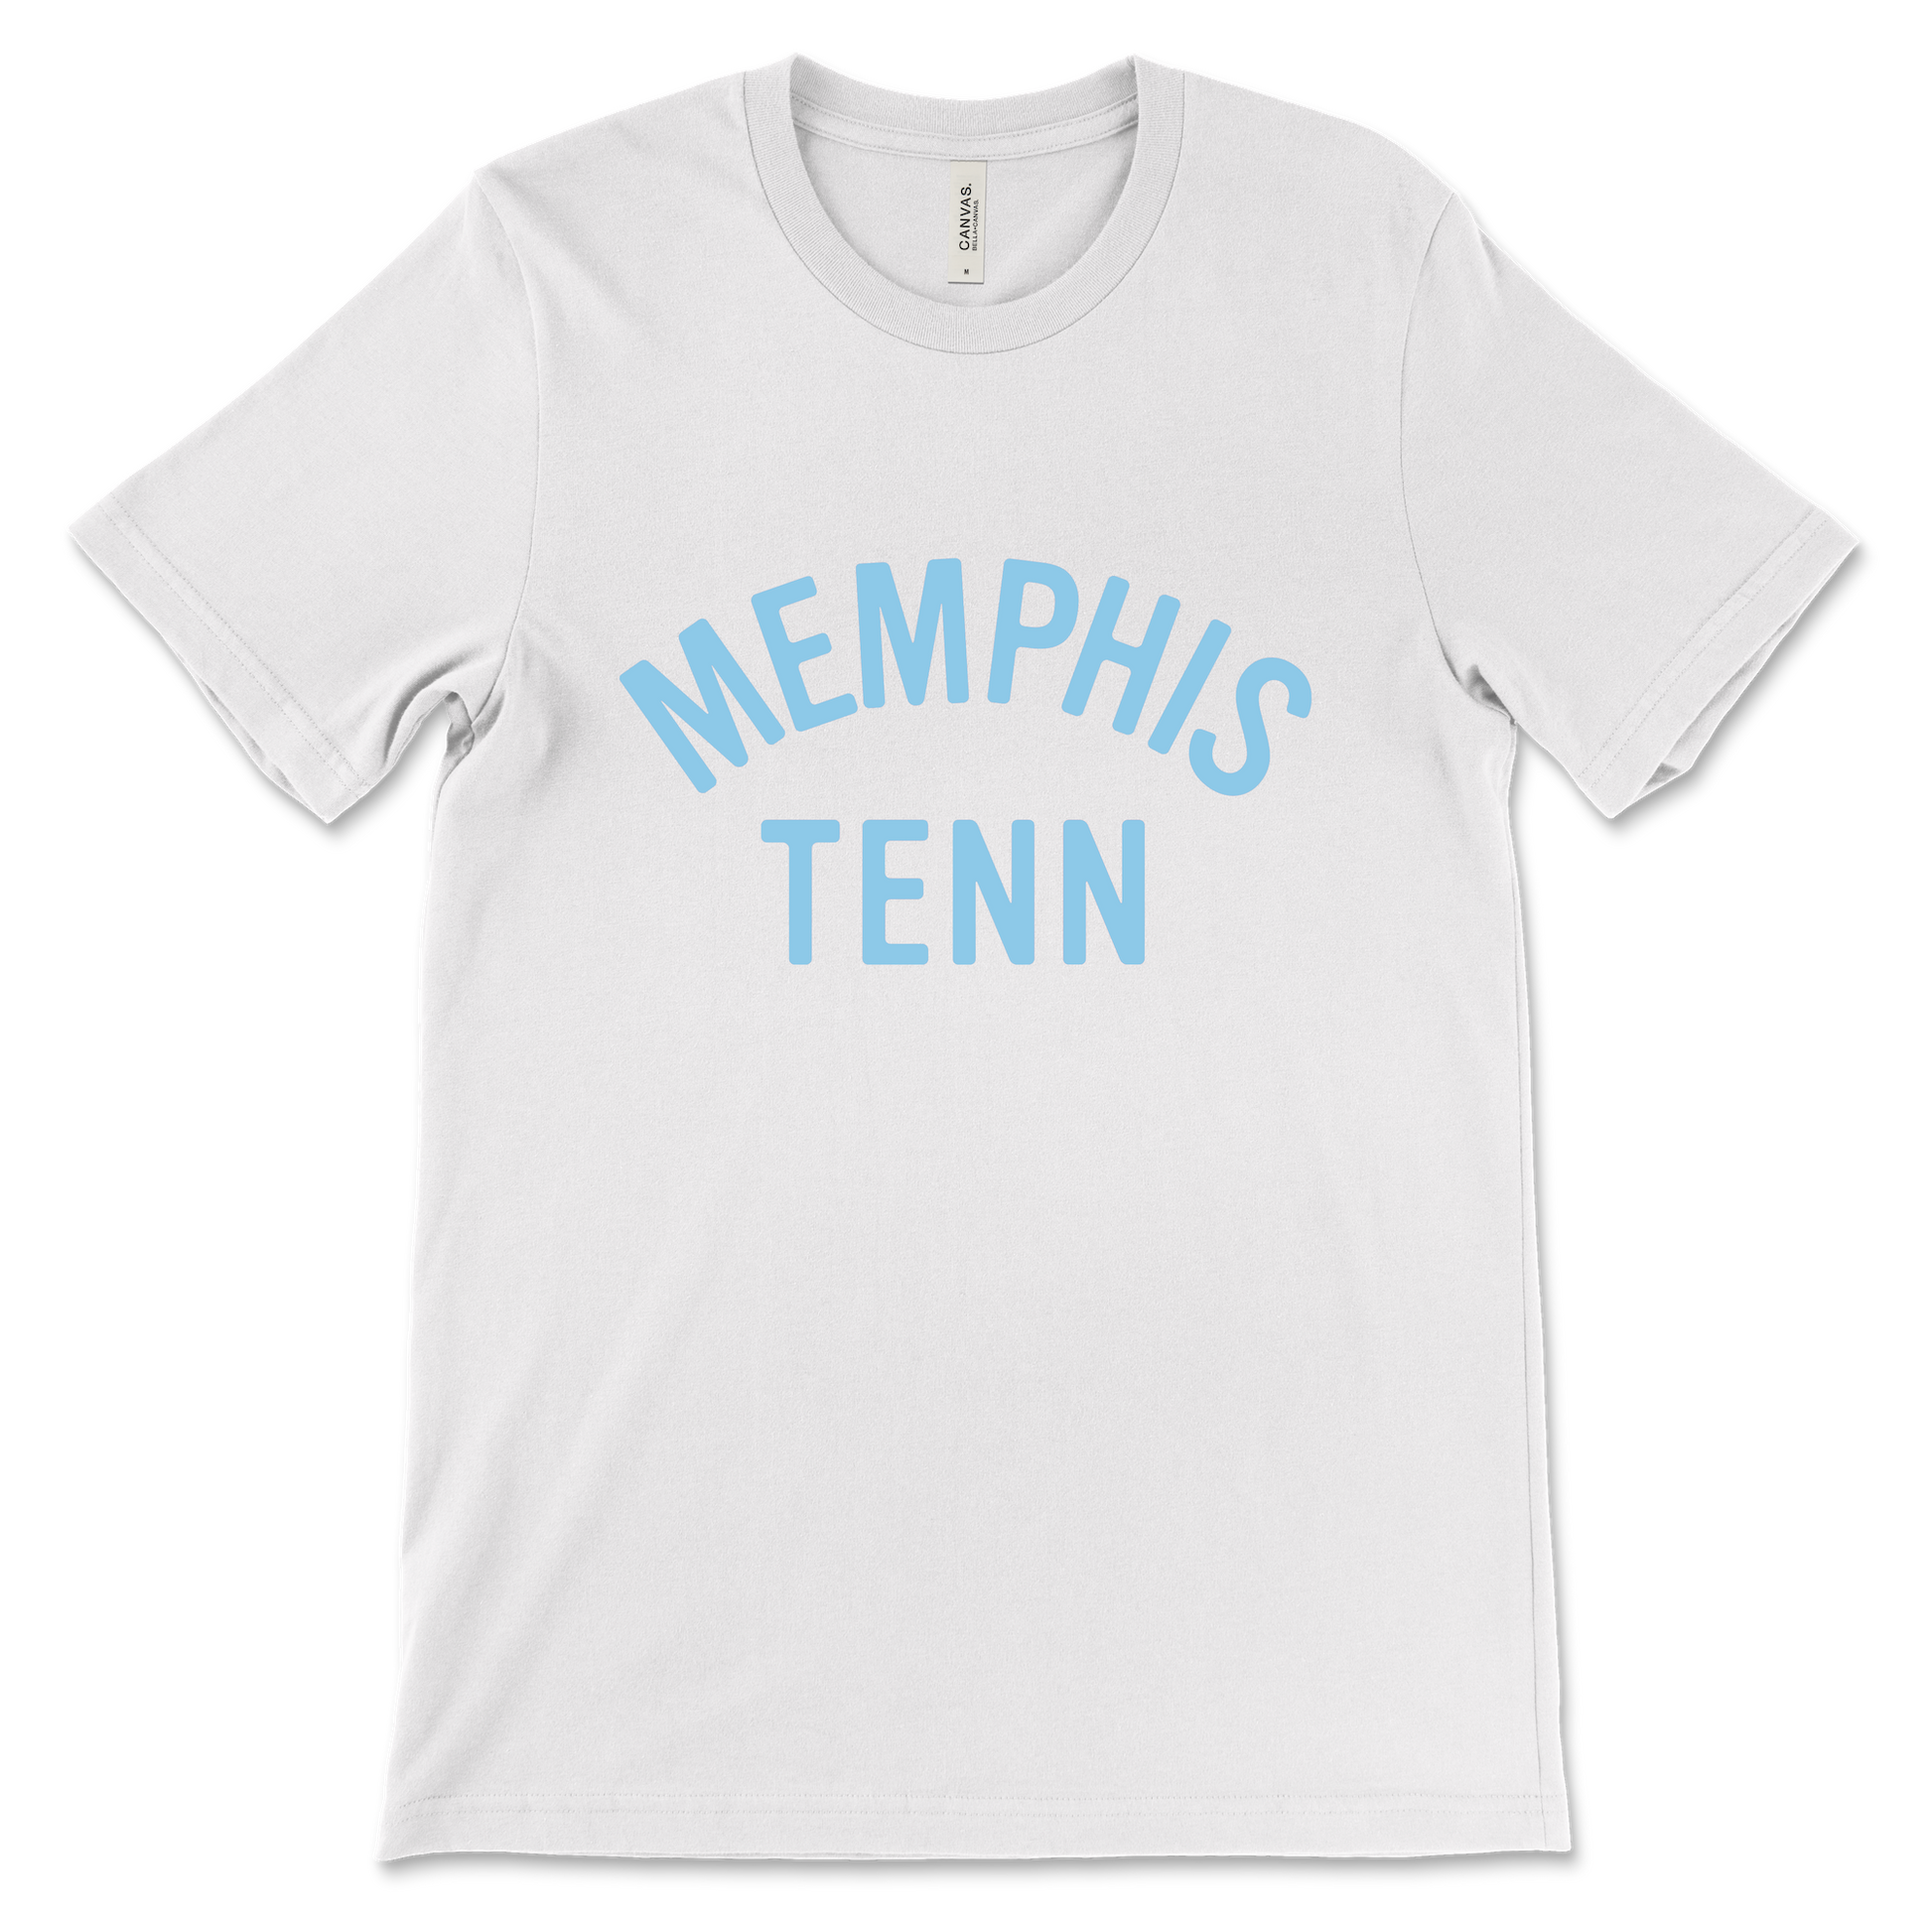 White MEMPHIS TENN TEE with "Choose901" text in blue letters.